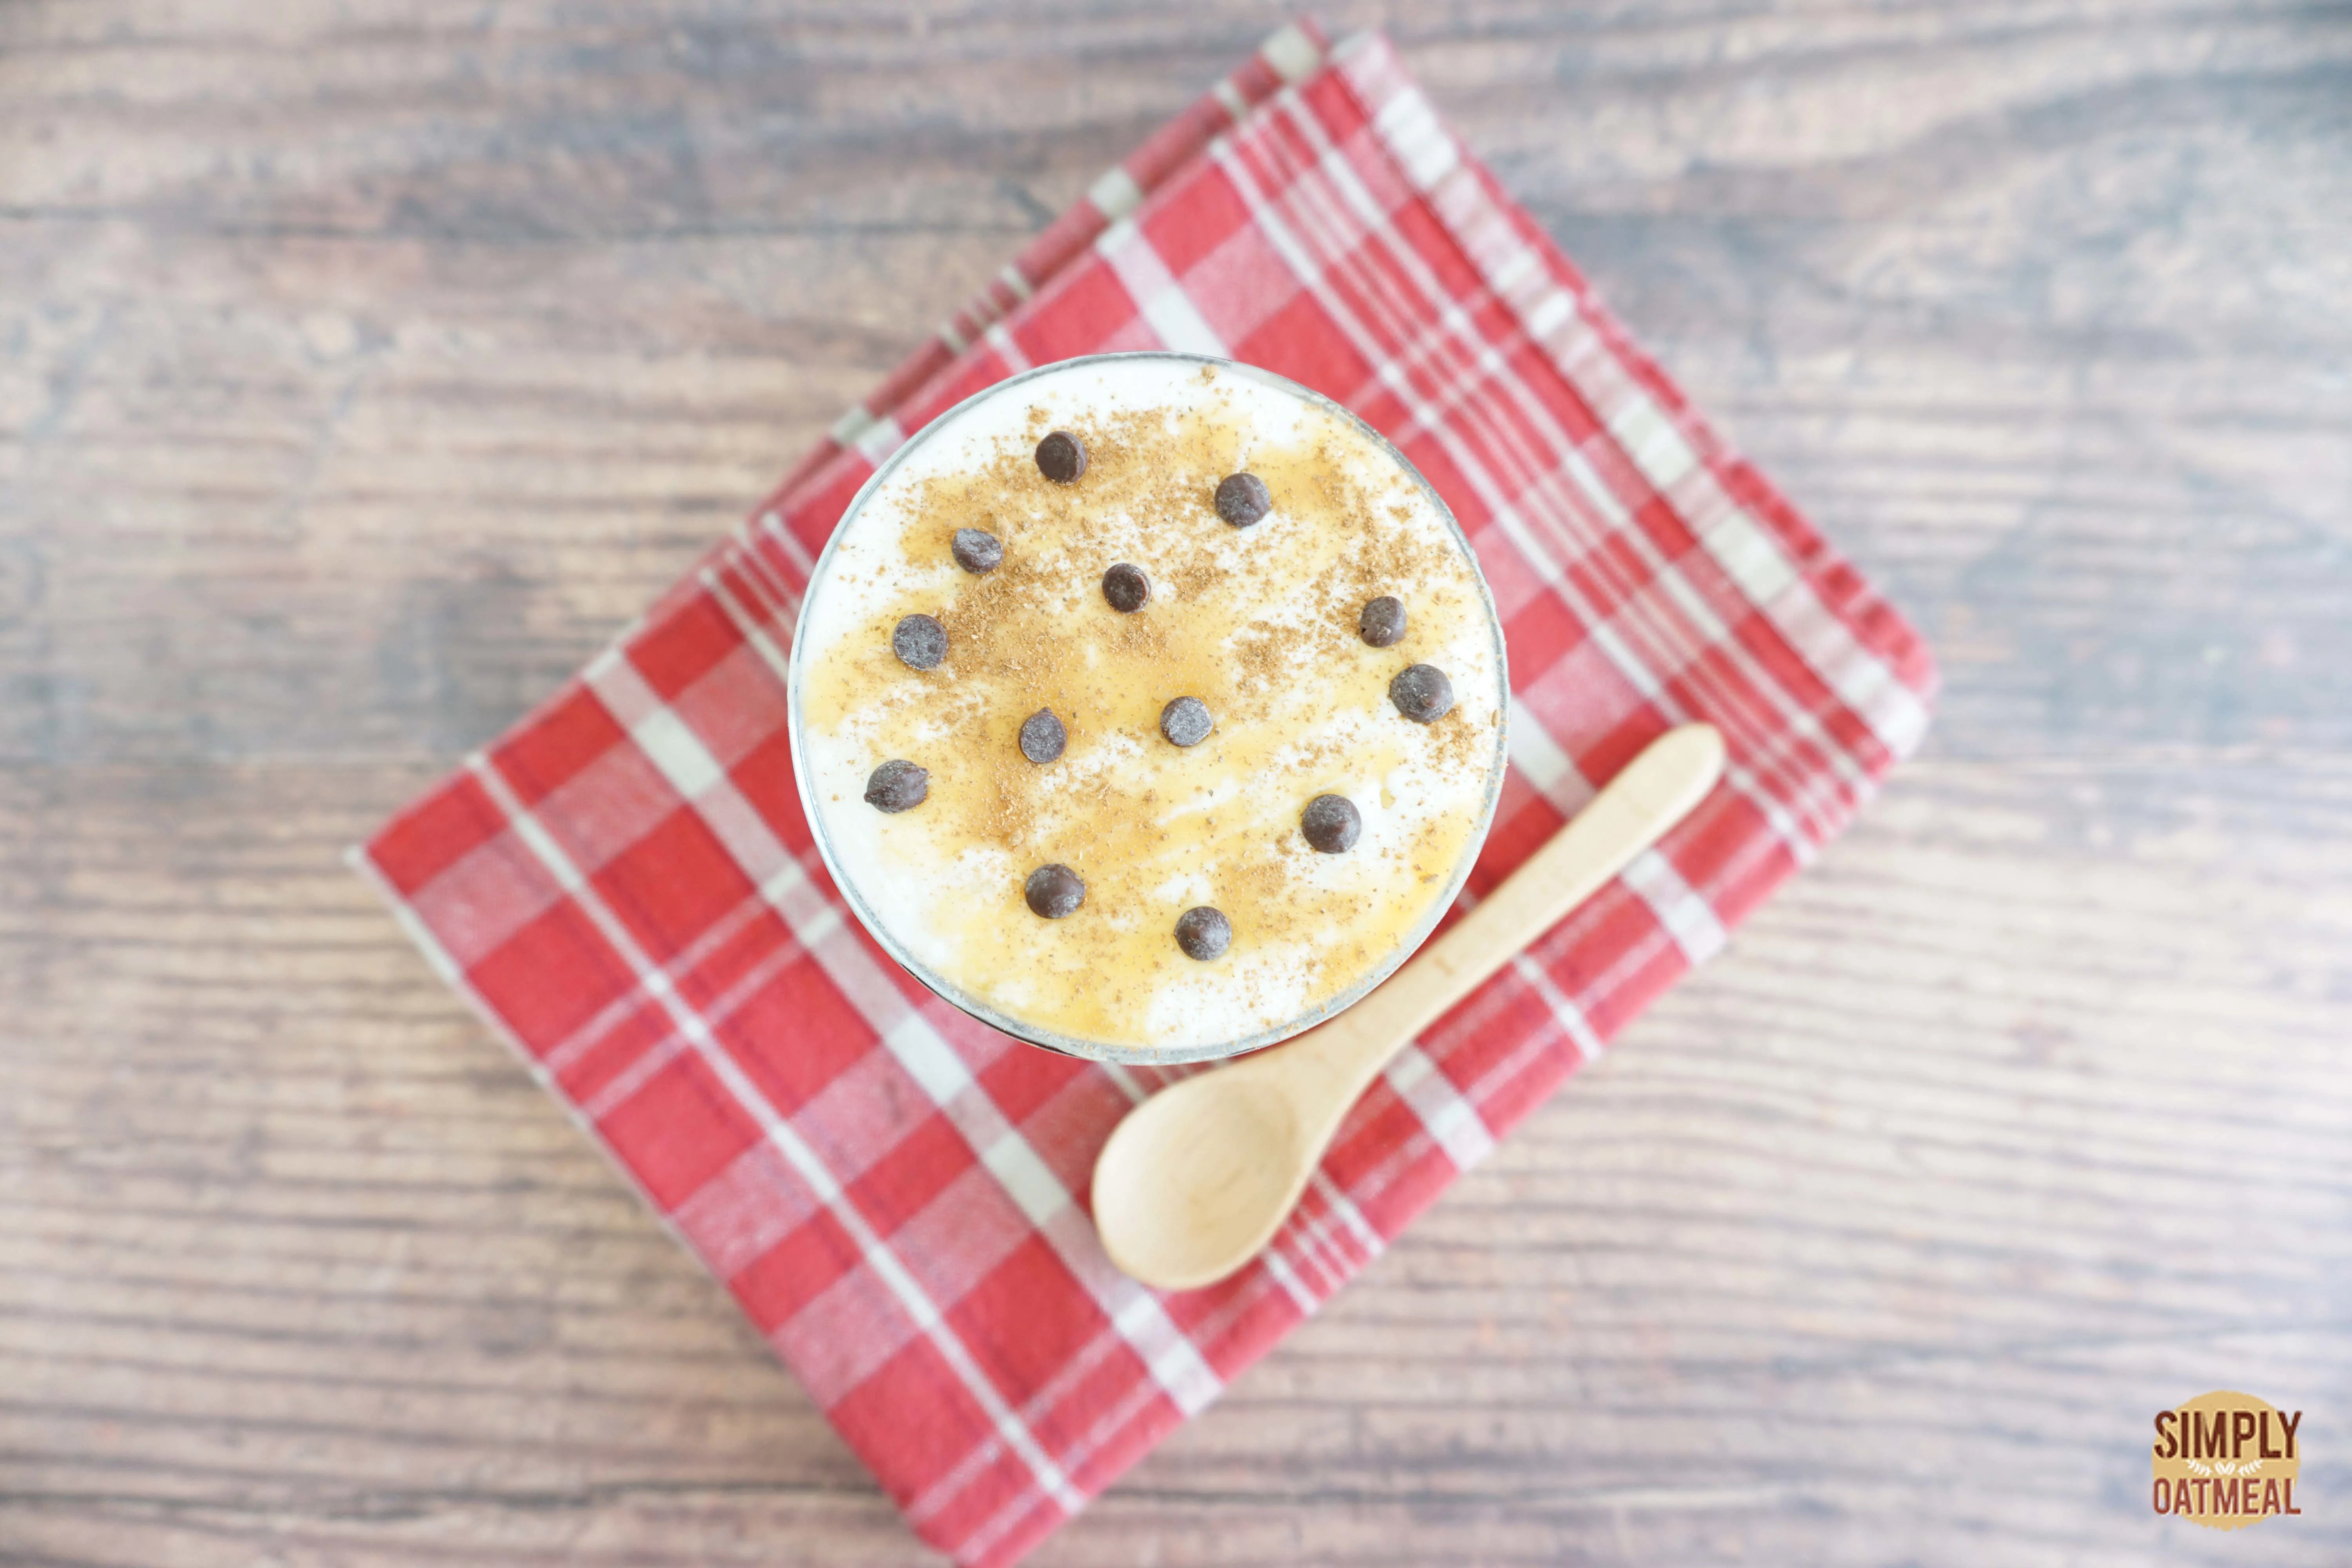 Caramel macchiato overnight oats topped with milk froth, caramel sauce, mini chocolate chips and a sprinkle of cinnamon.